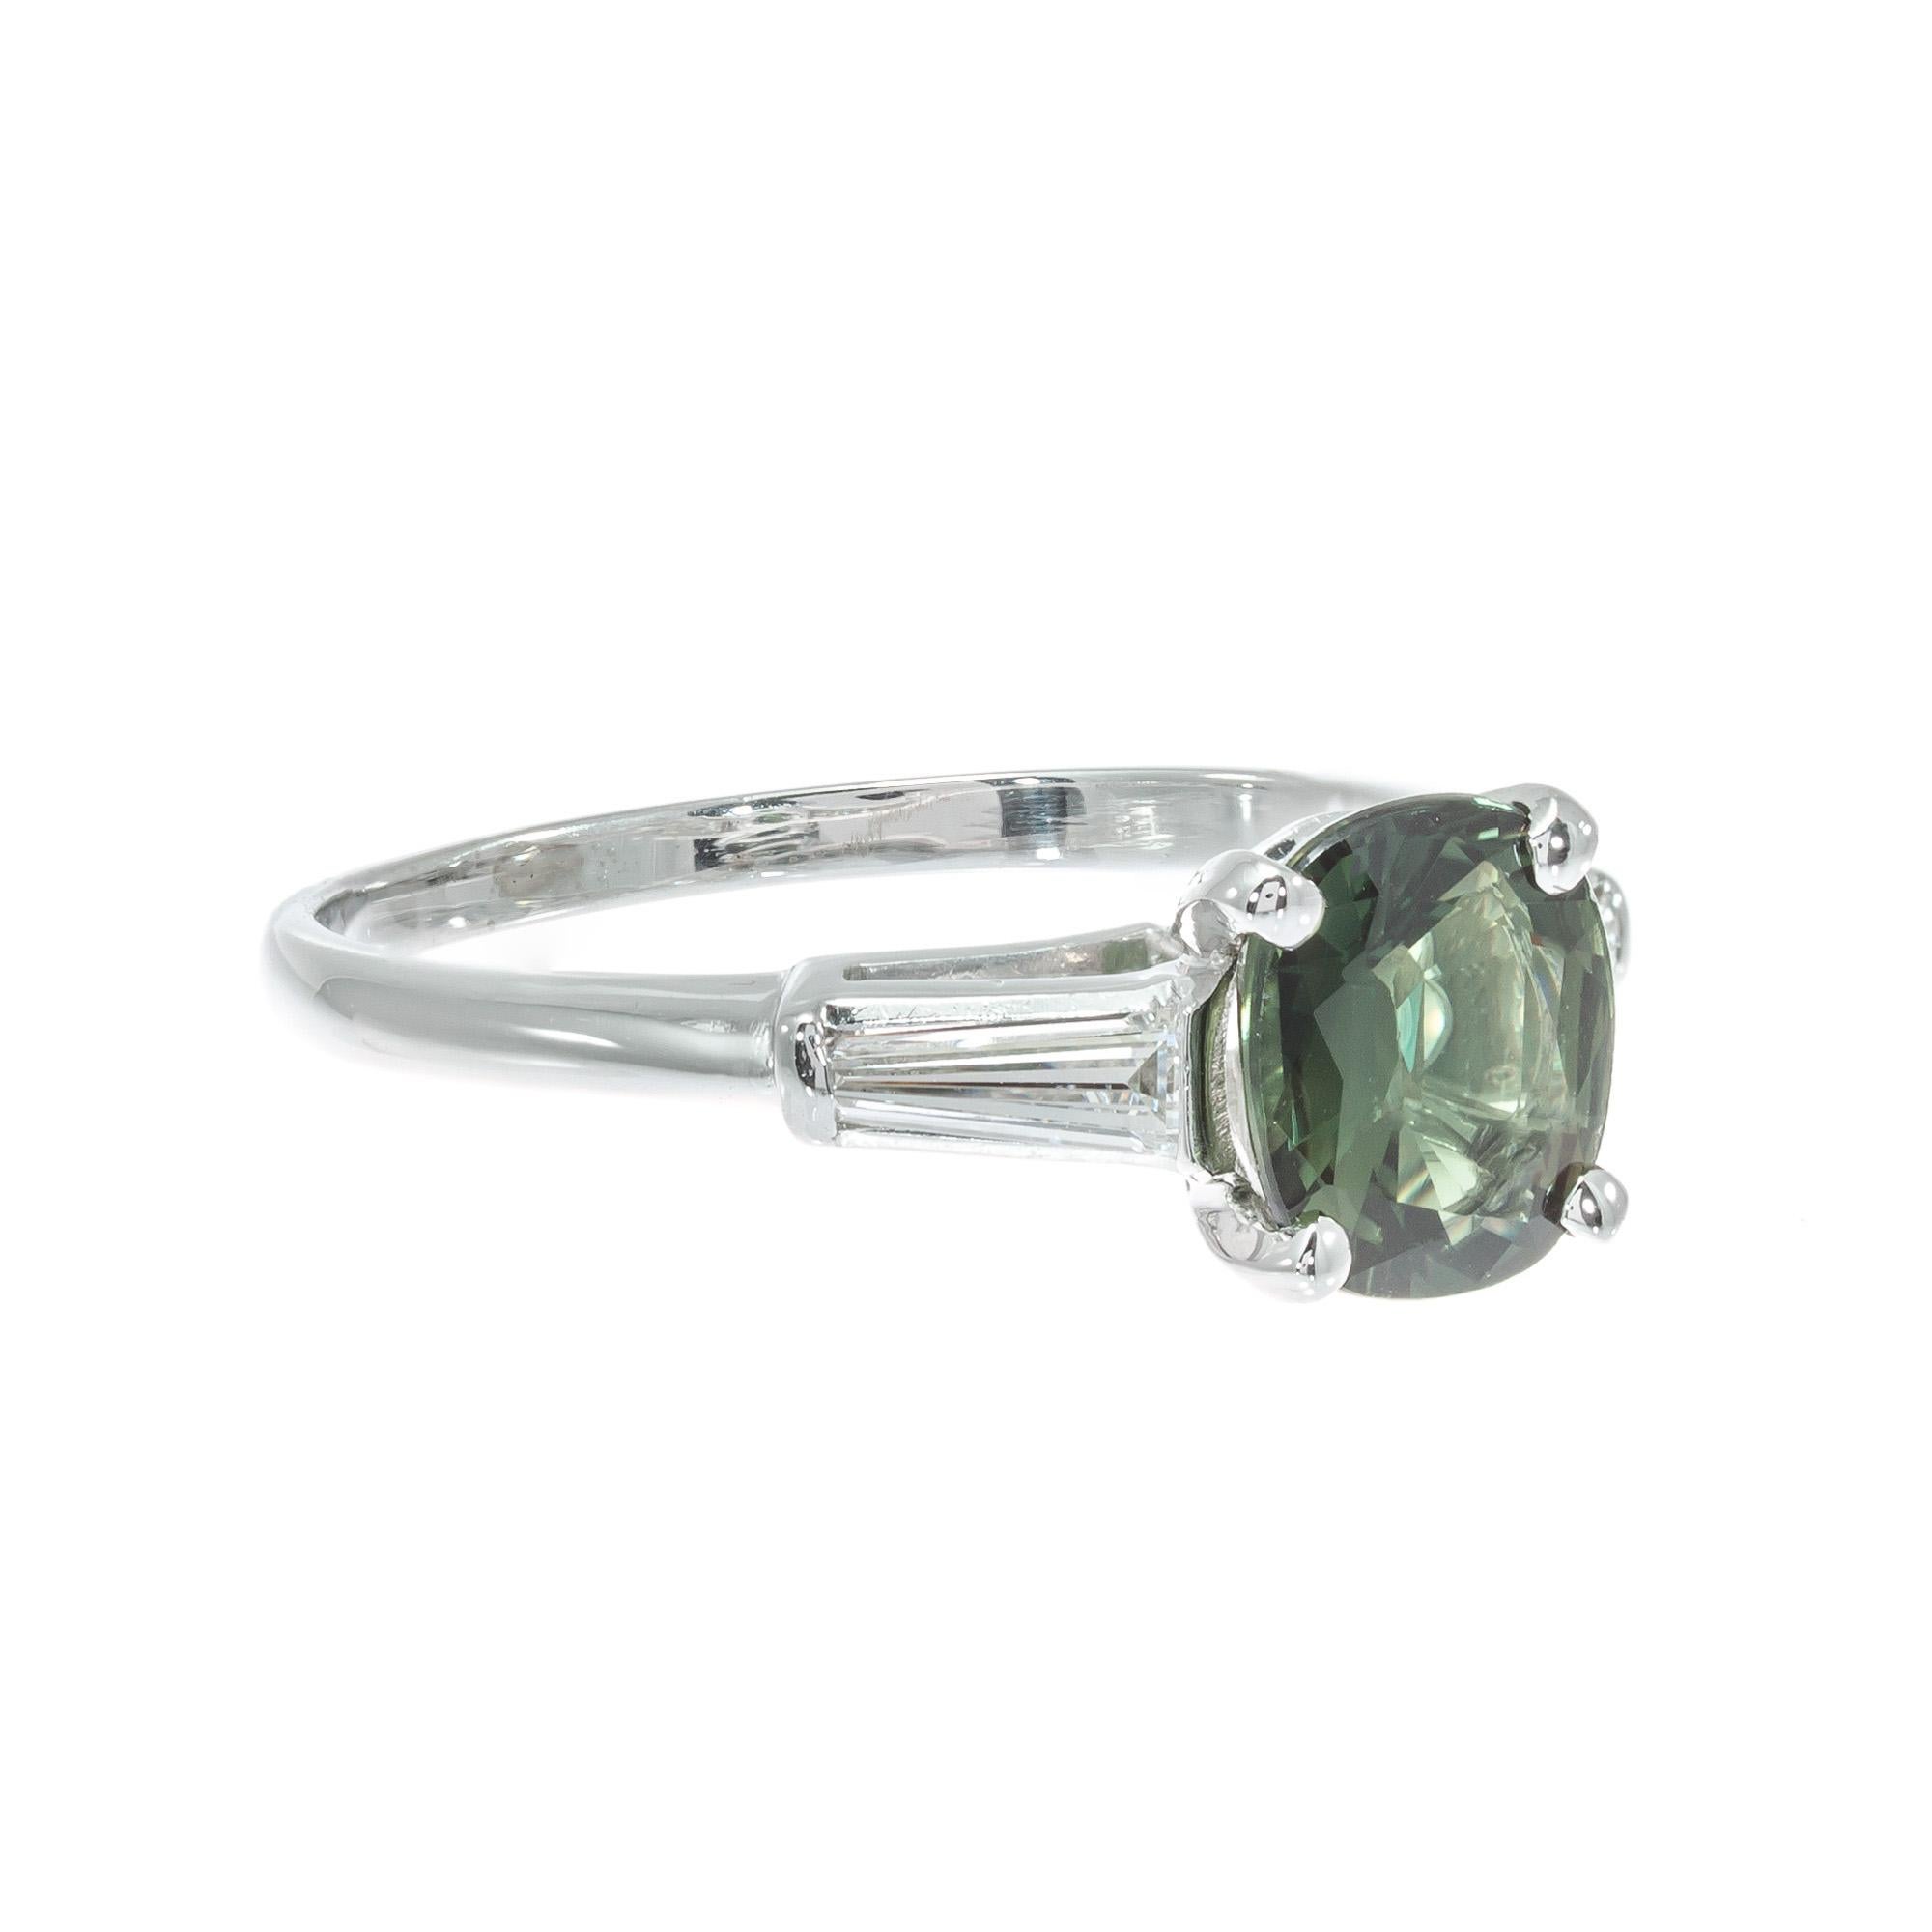 Vintage green sapphire and diamond engagement ring. oval sapphire center stone set in a original handmade platinum three-stone setting with two tapered baguette accent diamonds.  AGL Certified as natural color simple heat only.

1 cushion cut